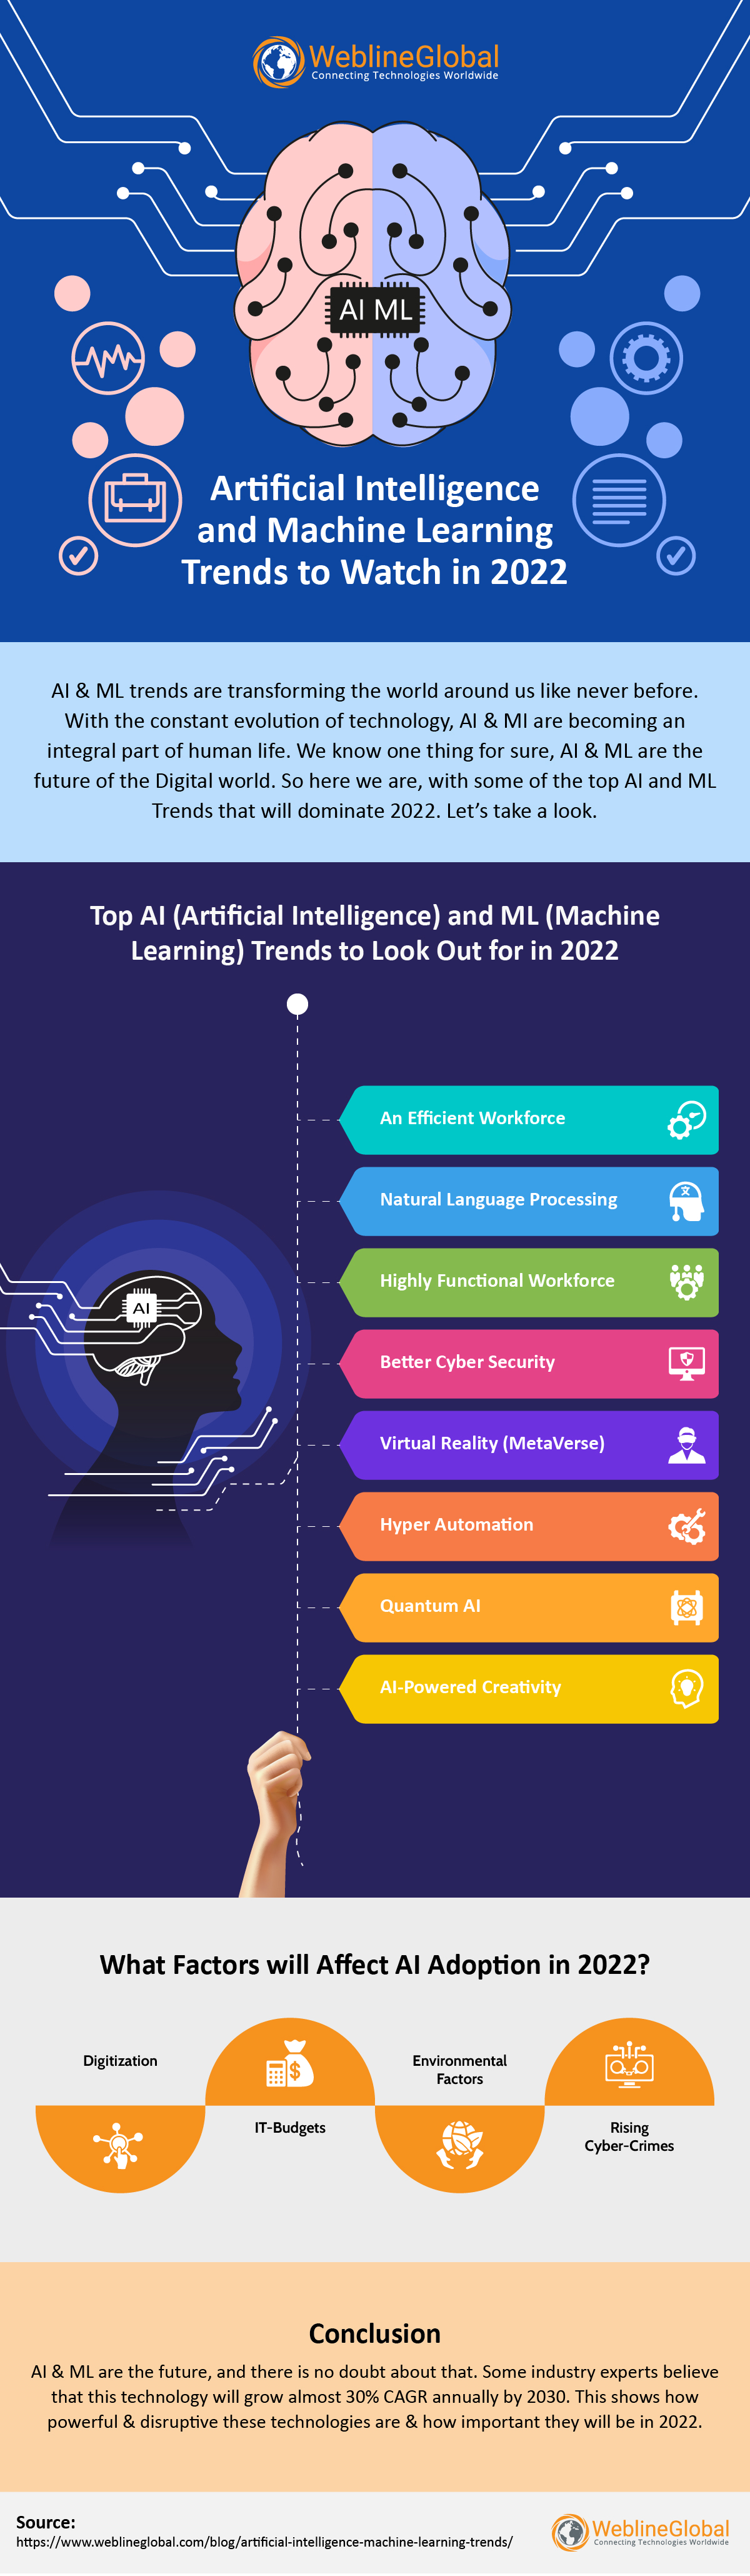 Artificial Intelligence and Machine Learning Trends 2022 Infographic